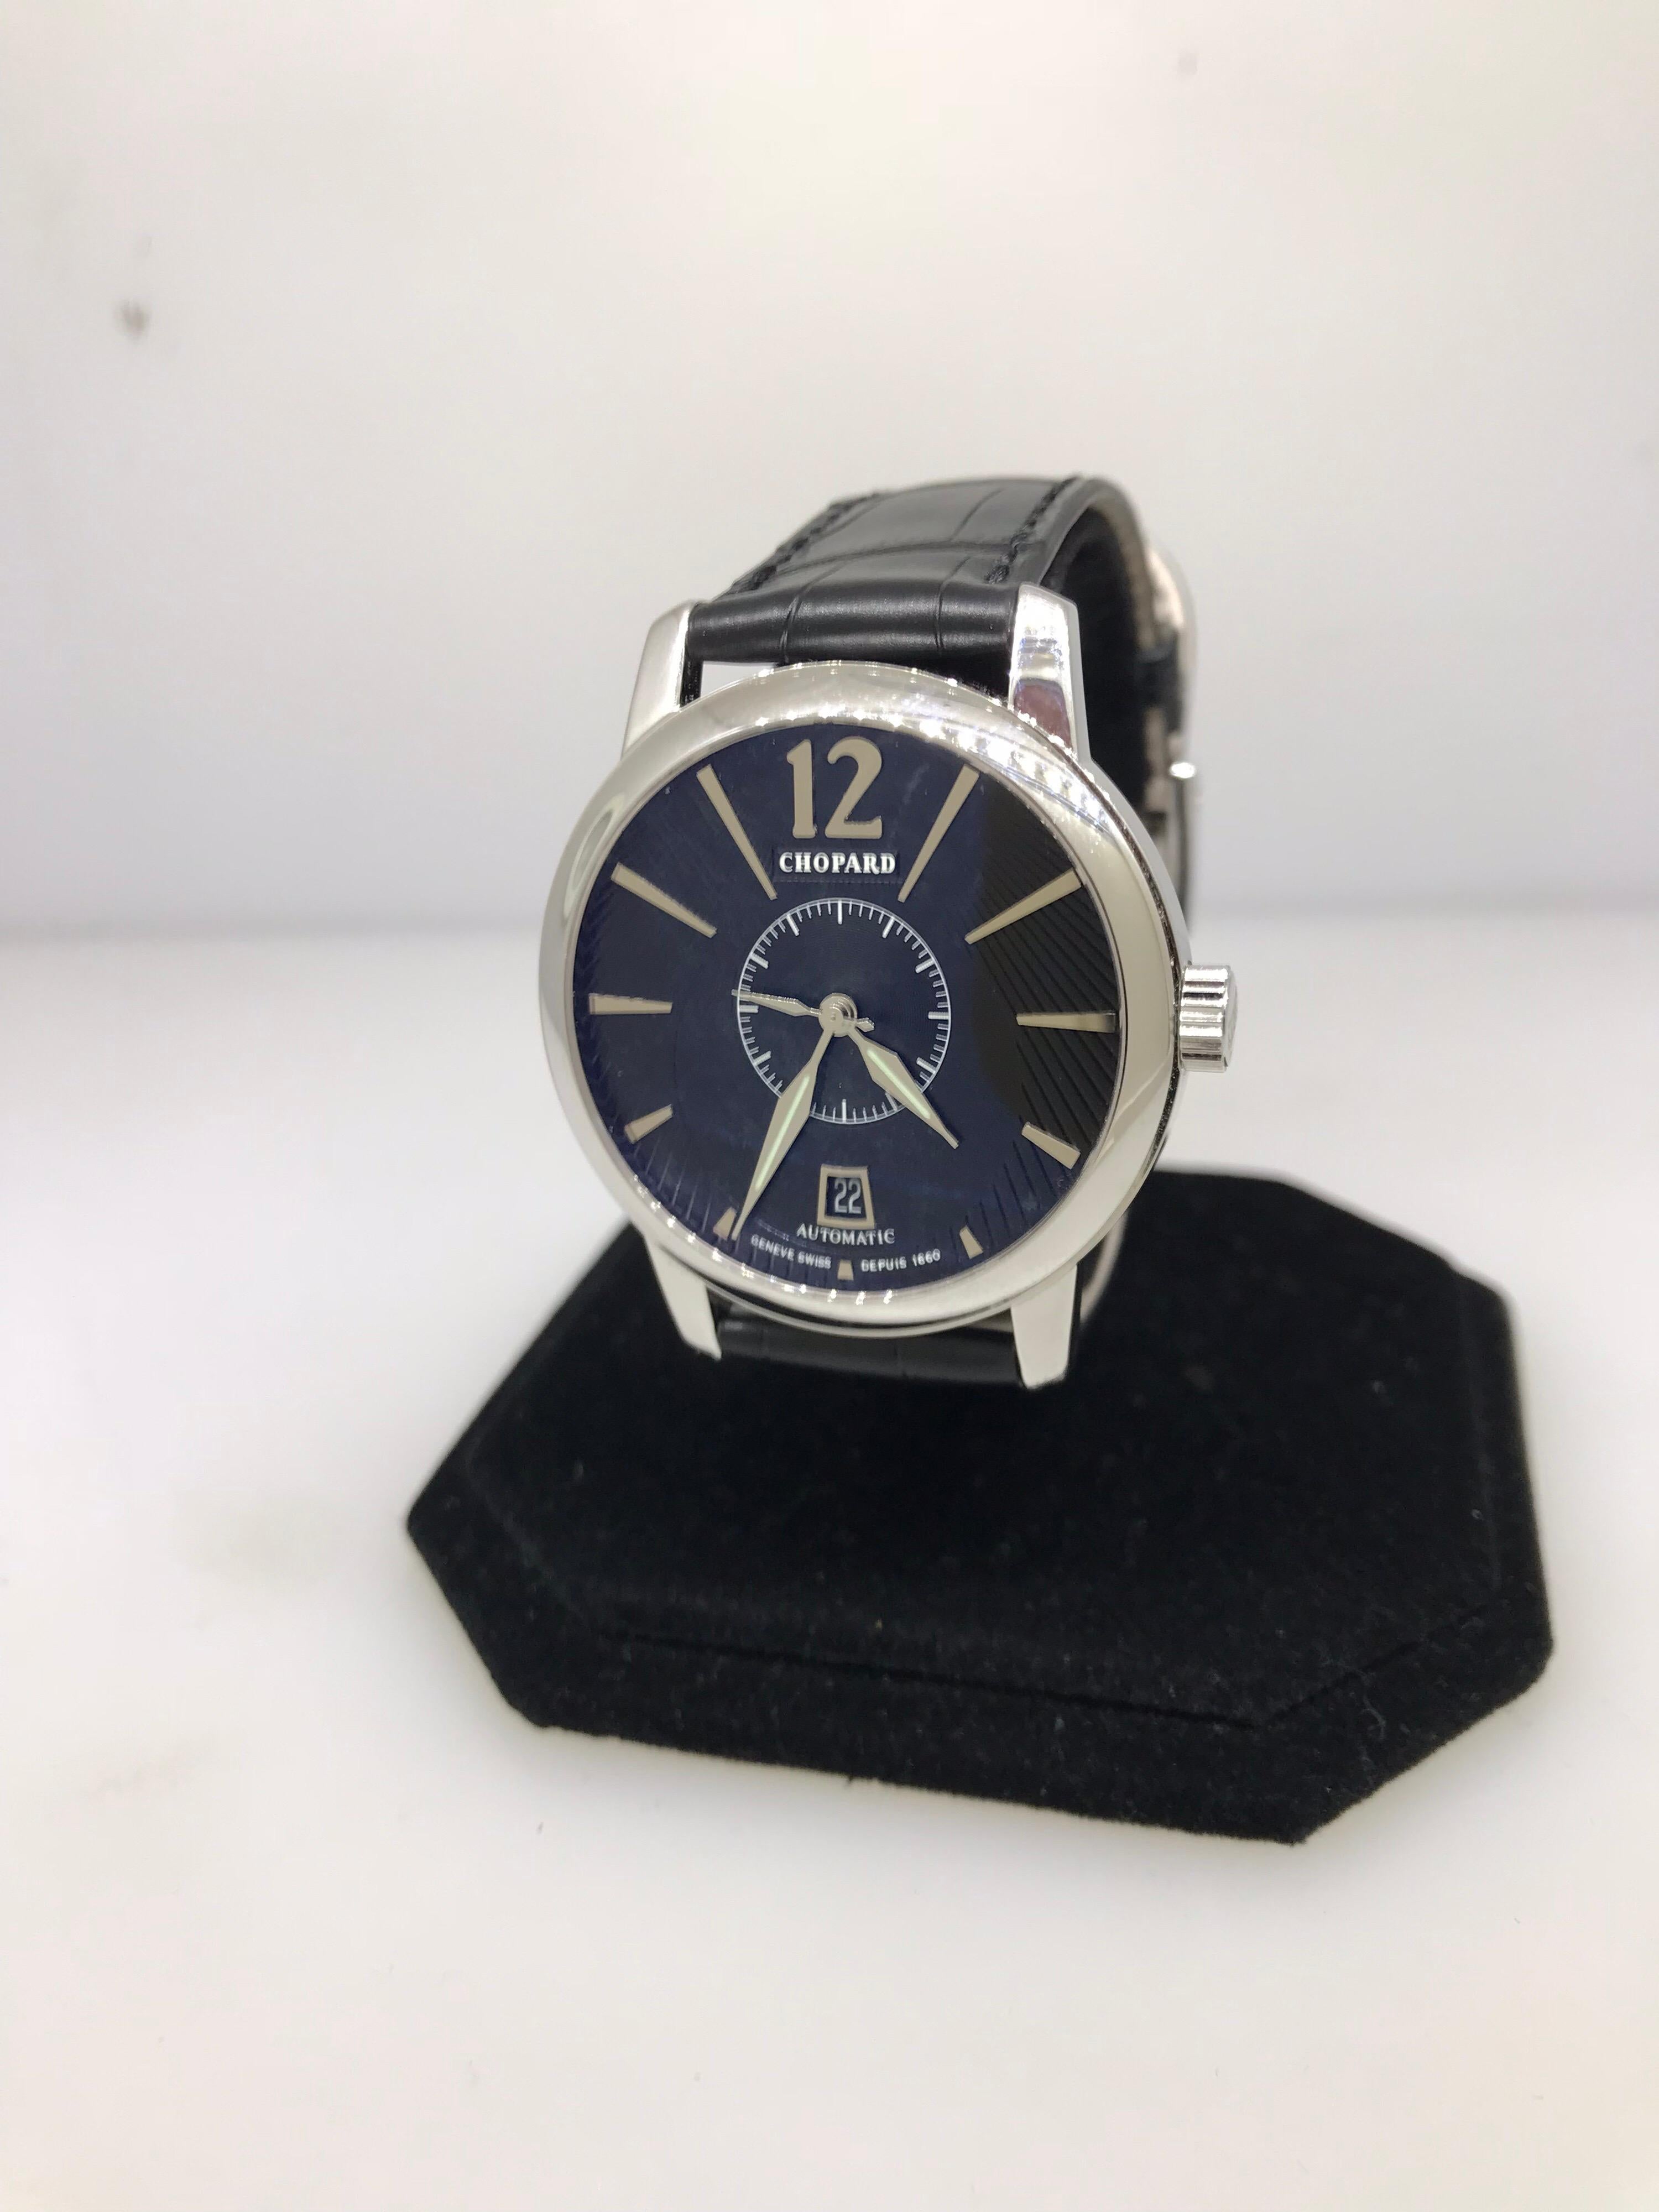 Chopard L.U.C. Classic Twin Men's Watch

Model Number: 16/1880-1001

100% Authentic

Brand New

Comes with original Chopard Box, Certificate of Authenticity and Warranty and Instruction Manual

18 Karat White Gold Case & Buckle

Black Dial &